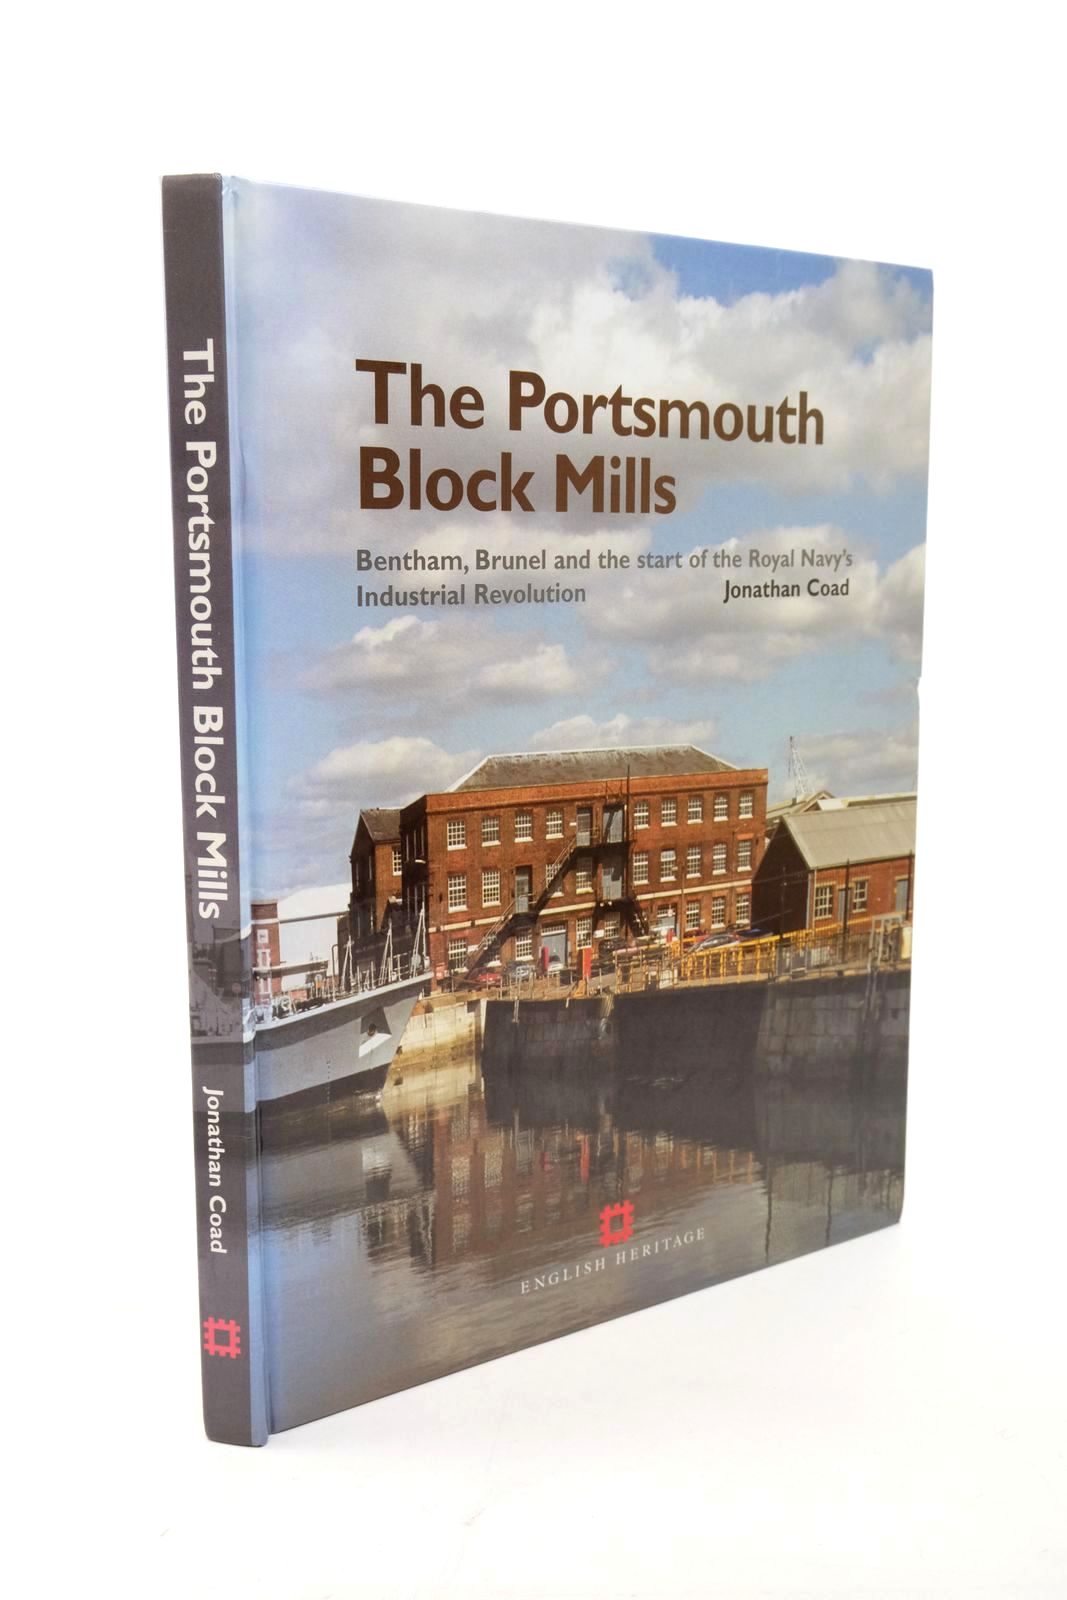 Photo of THE PORTSMOUTH BLOCK MILLS written by Coad, Jonathan published by English Heritage (STOCK CODE: 1322471)  for sale by Stella & Rose's Books